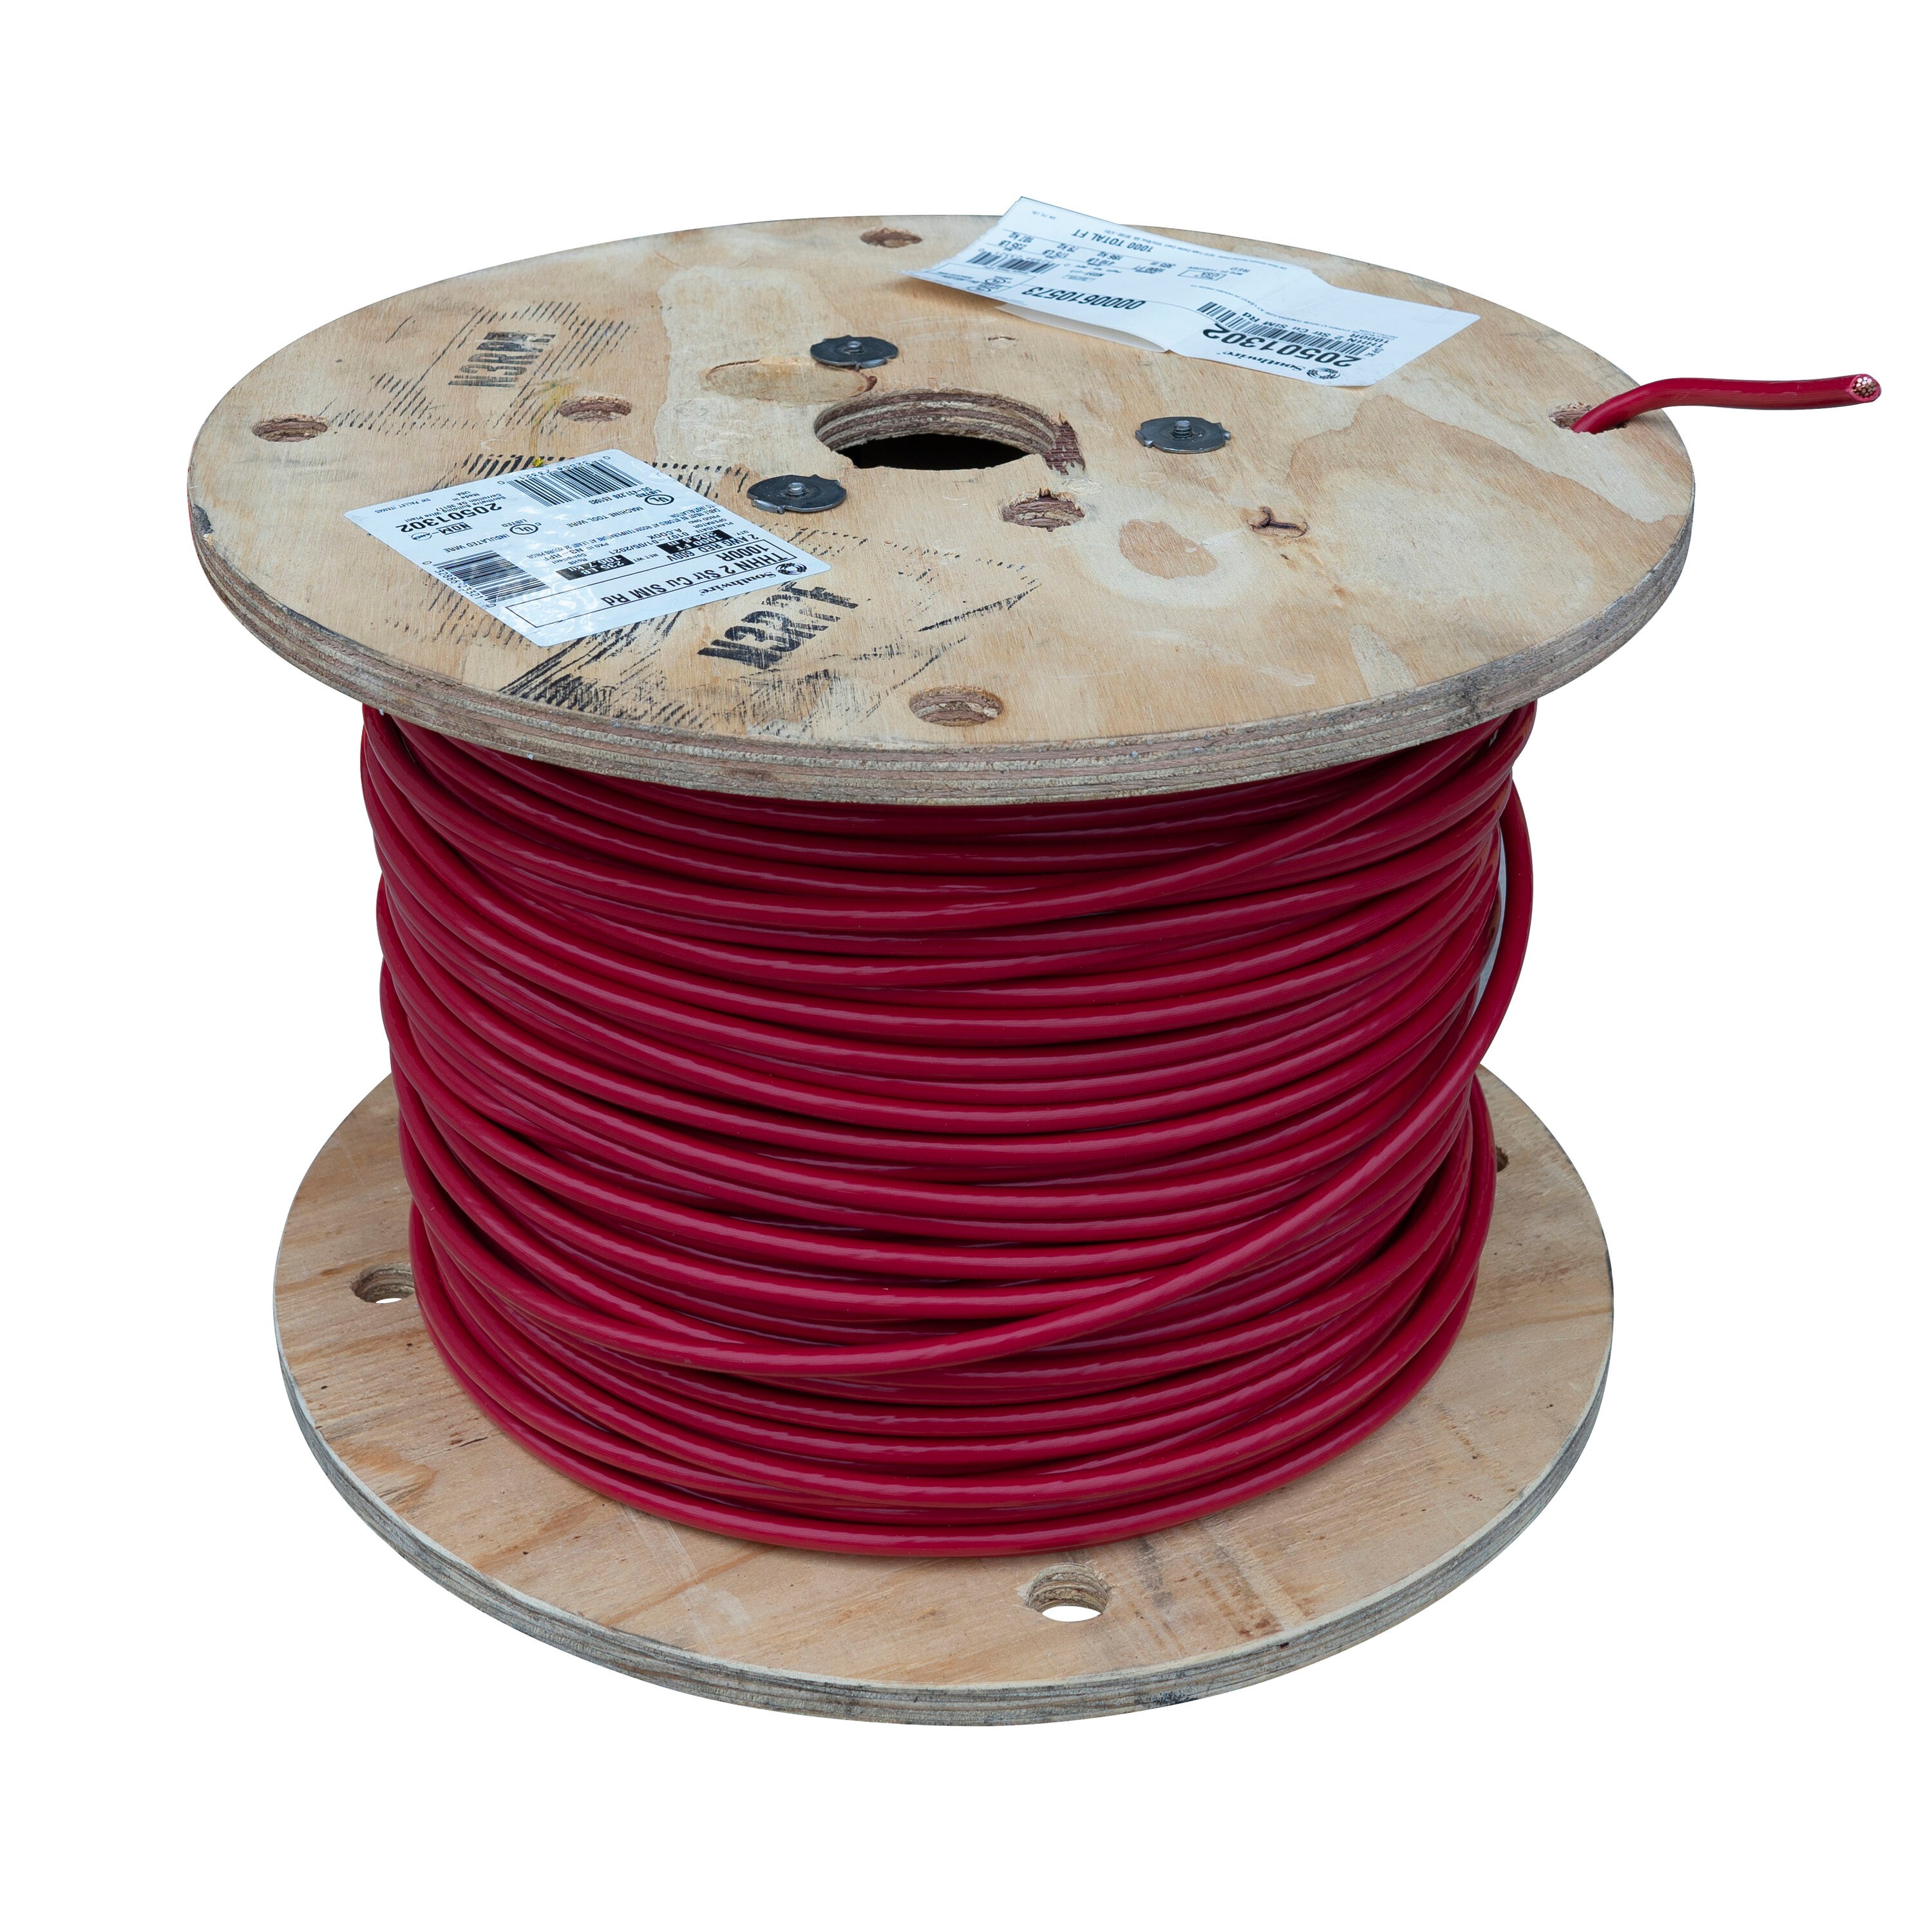 25' roll of 2 Conductor stranded 20 AWG N scale Wire Works: HOOK UP WIRE 